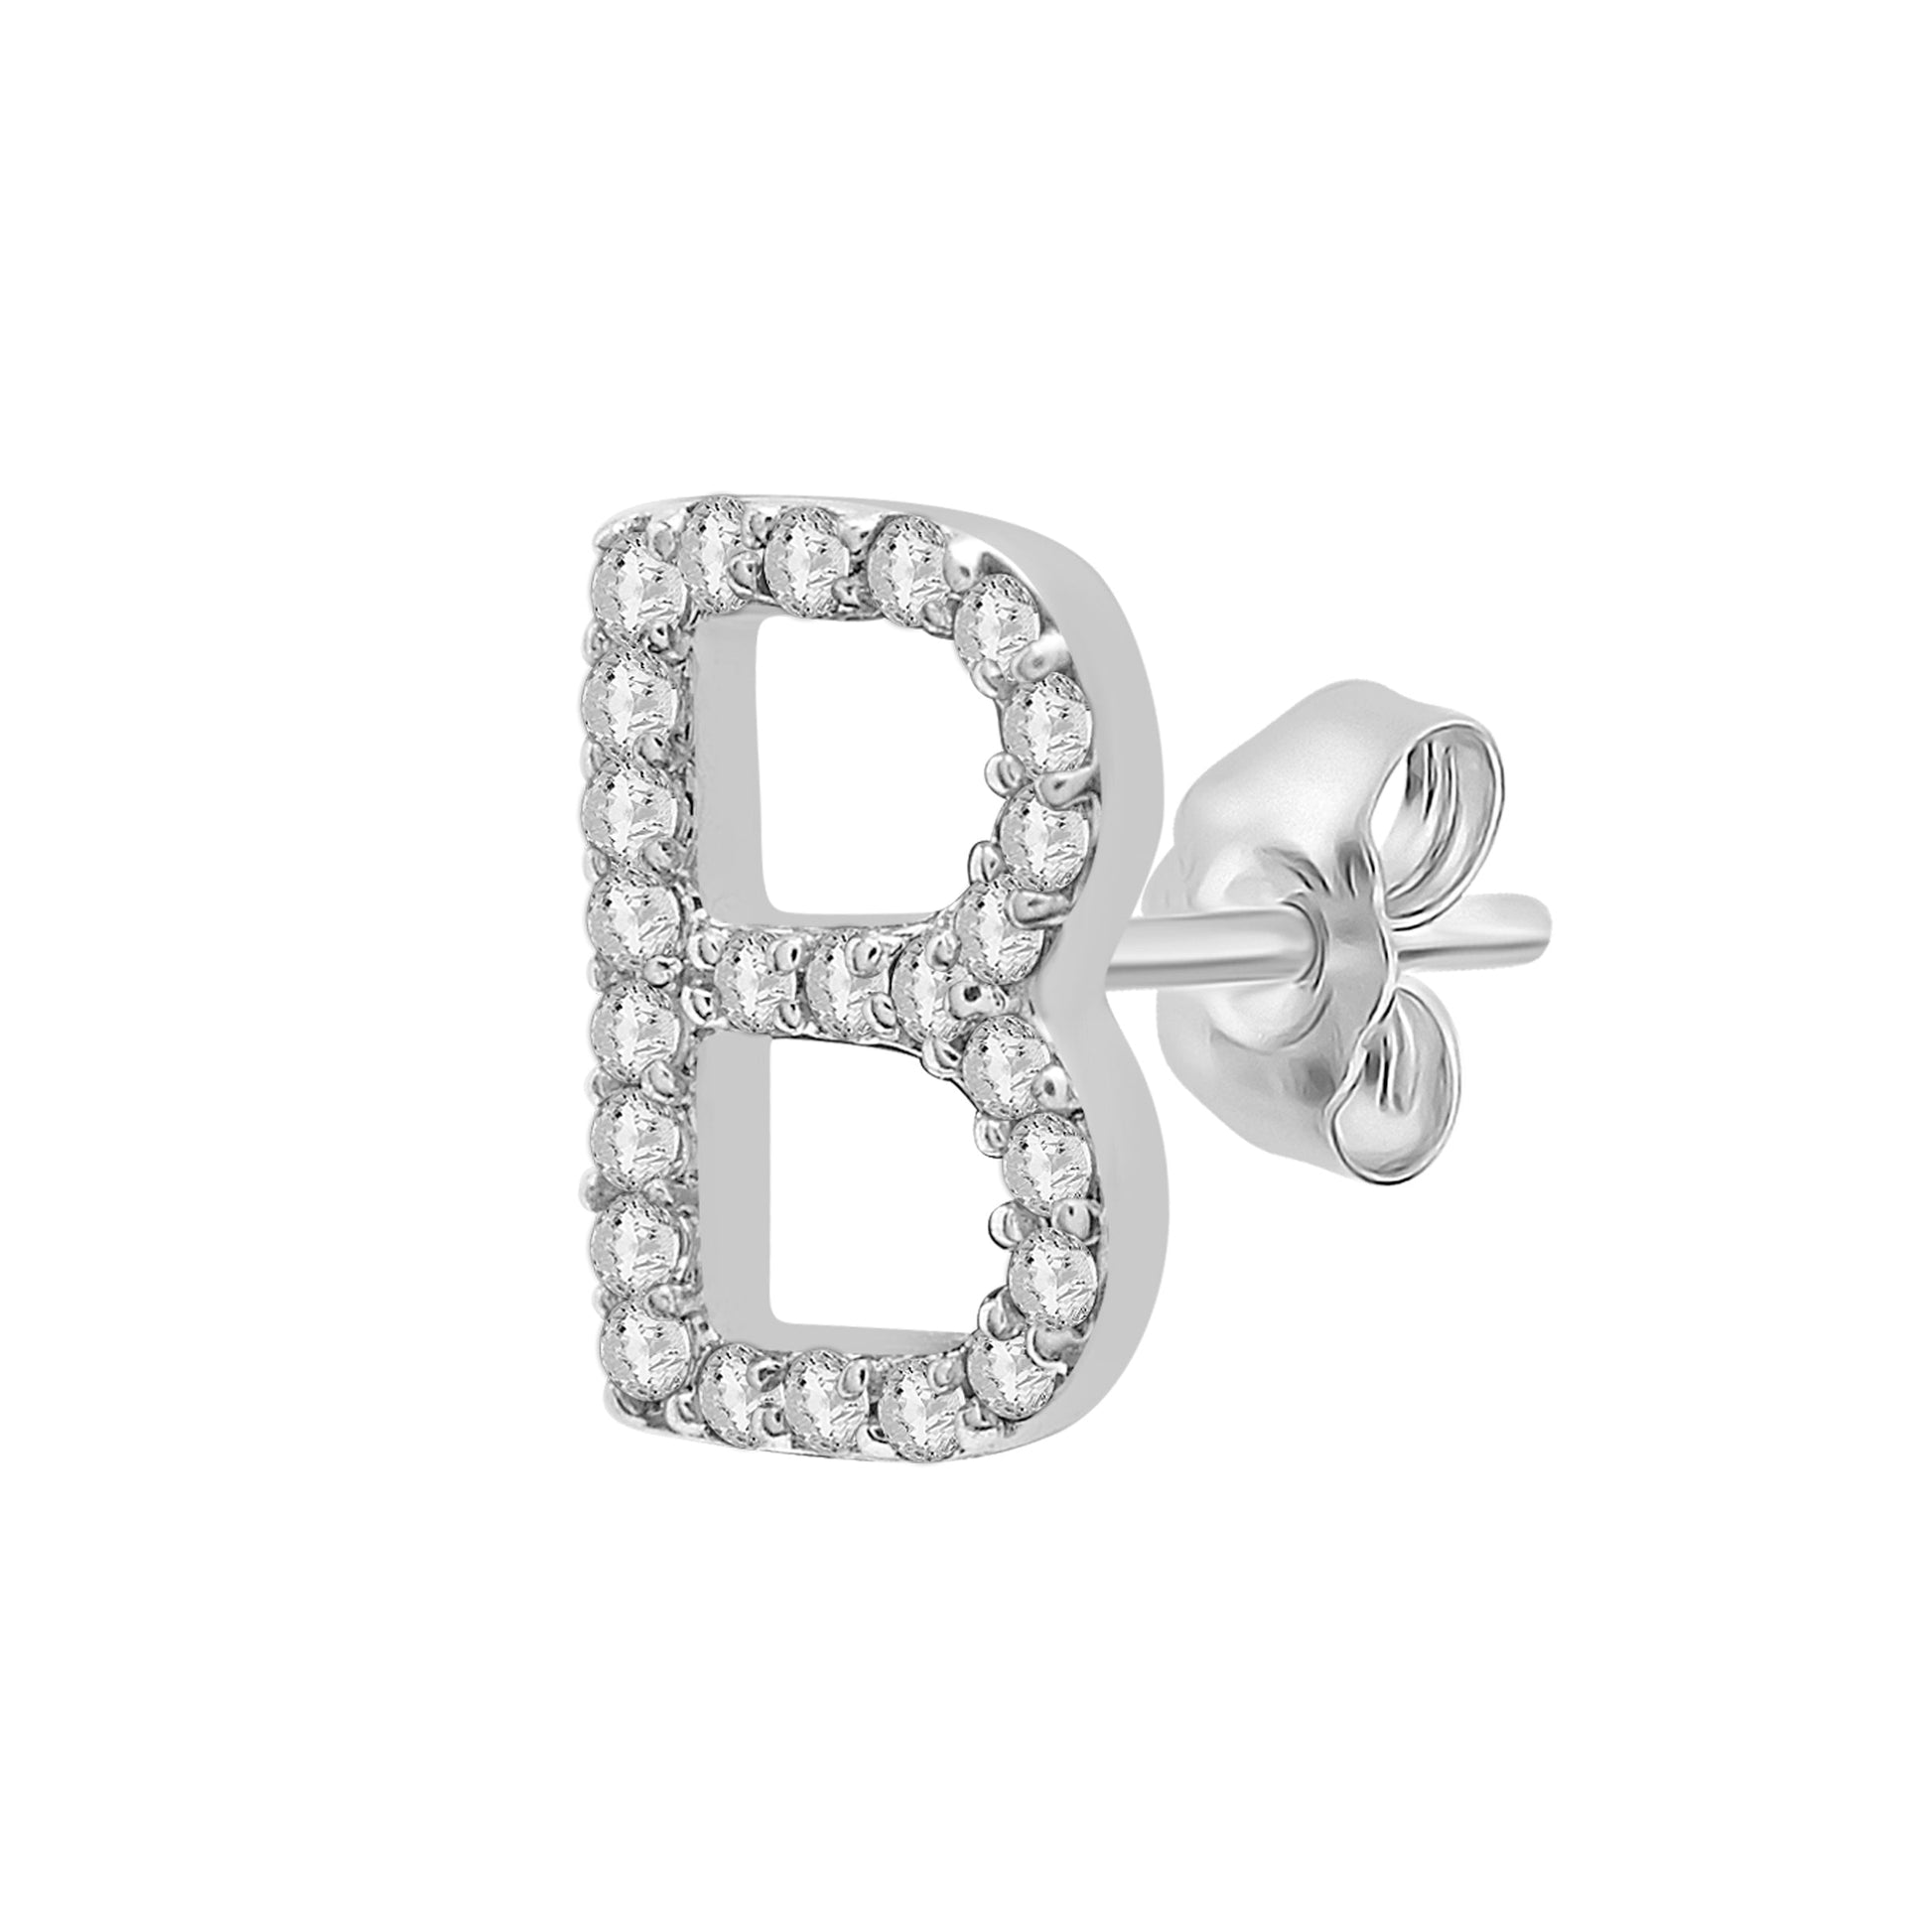 Single Initial Diamond Stud - B in White Gold For Ear